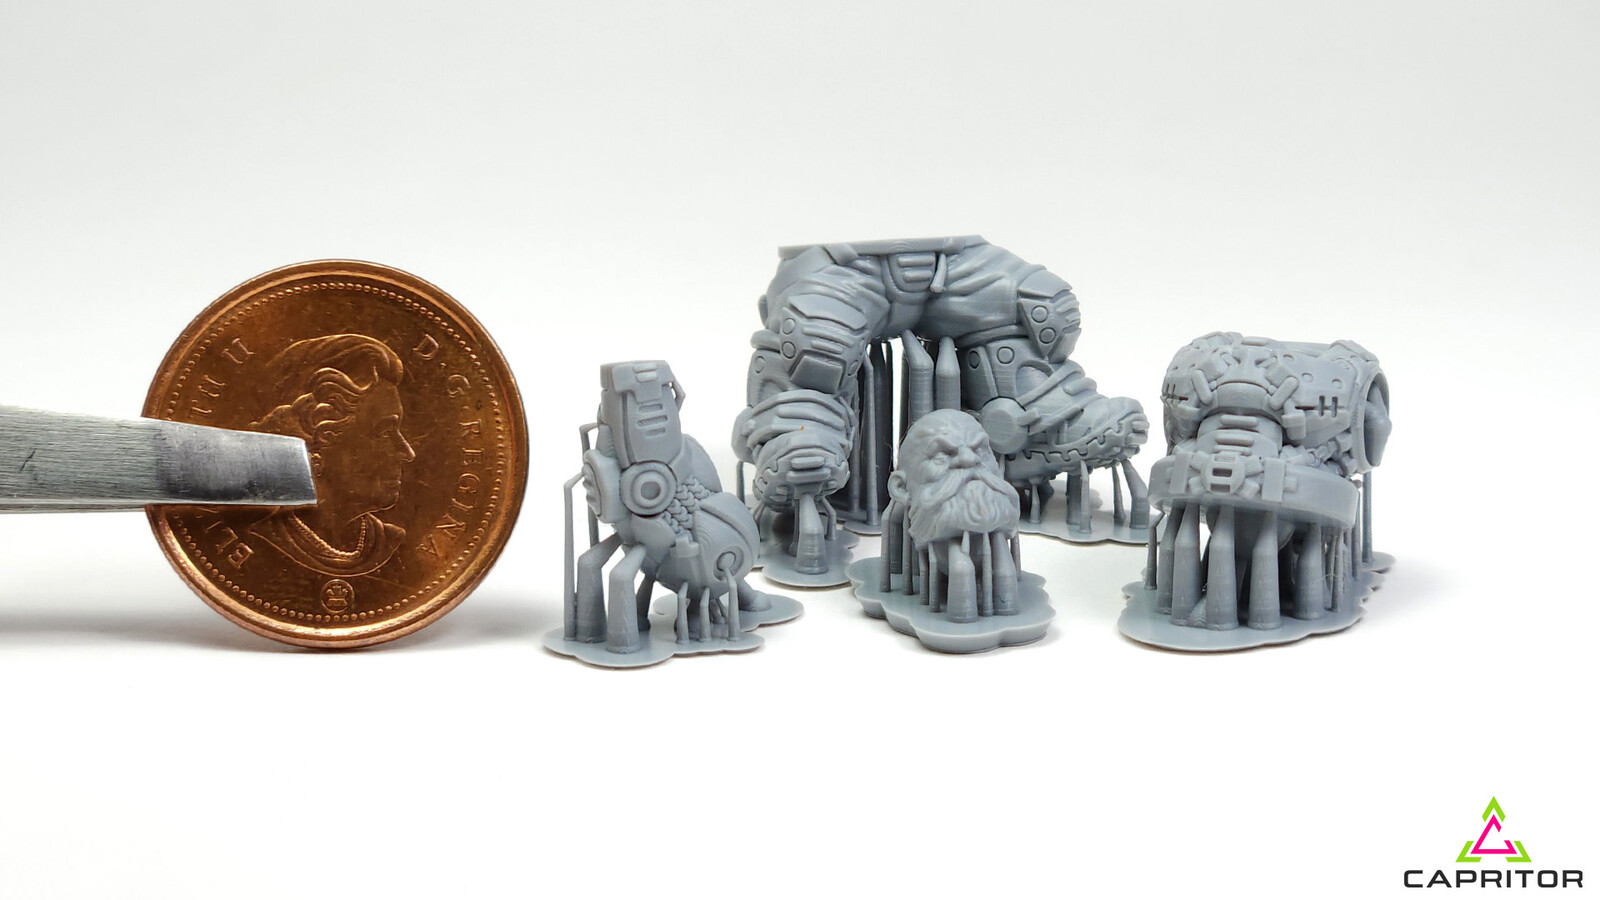 More Space Dwarf Parts 3D Printed on Our Commercial Printer